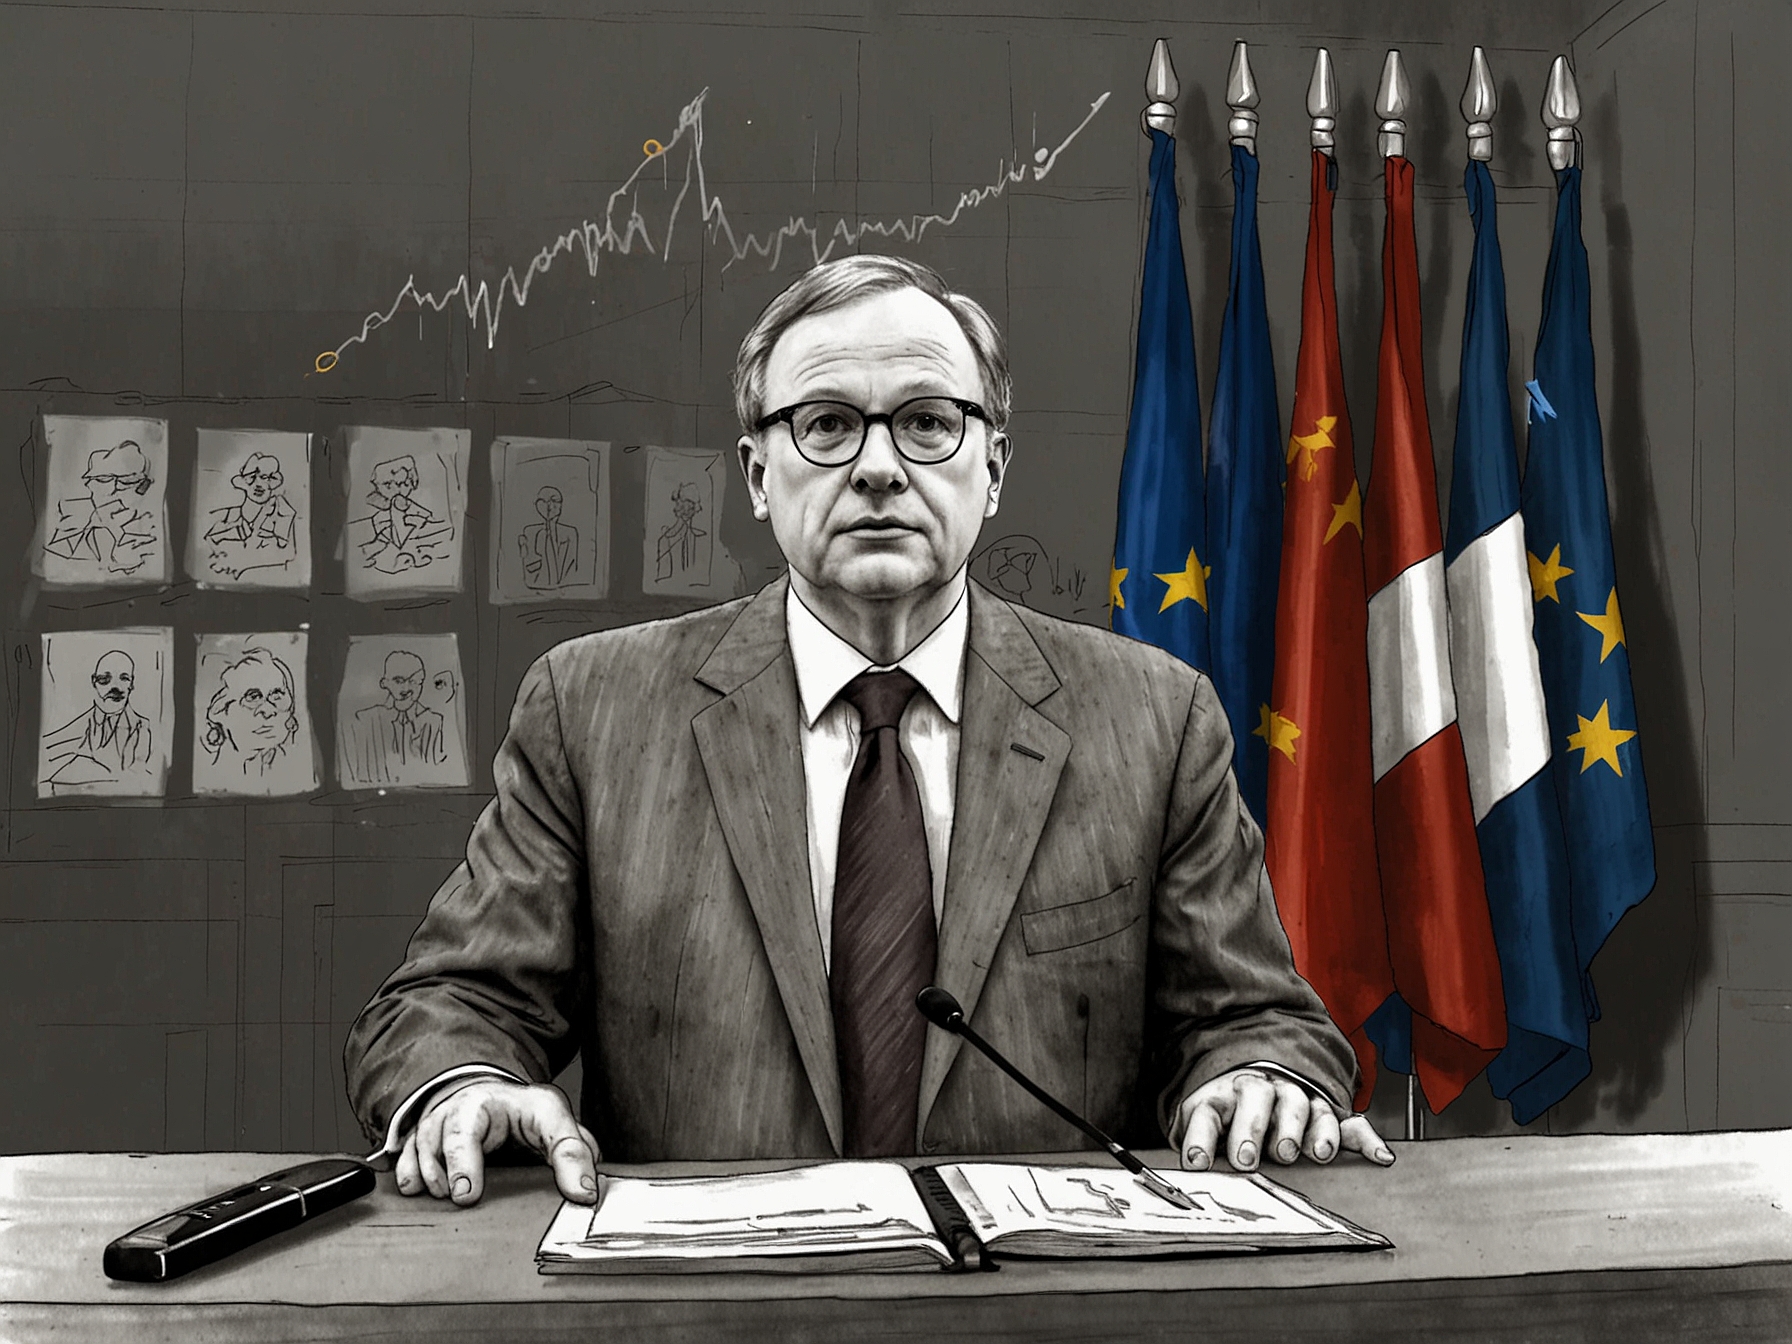 An image of Philip Lane, Chief Economist of the ECB, speaking at a press conference, emphasizing the stability and resilience of the French economy despite recent financial challenges.